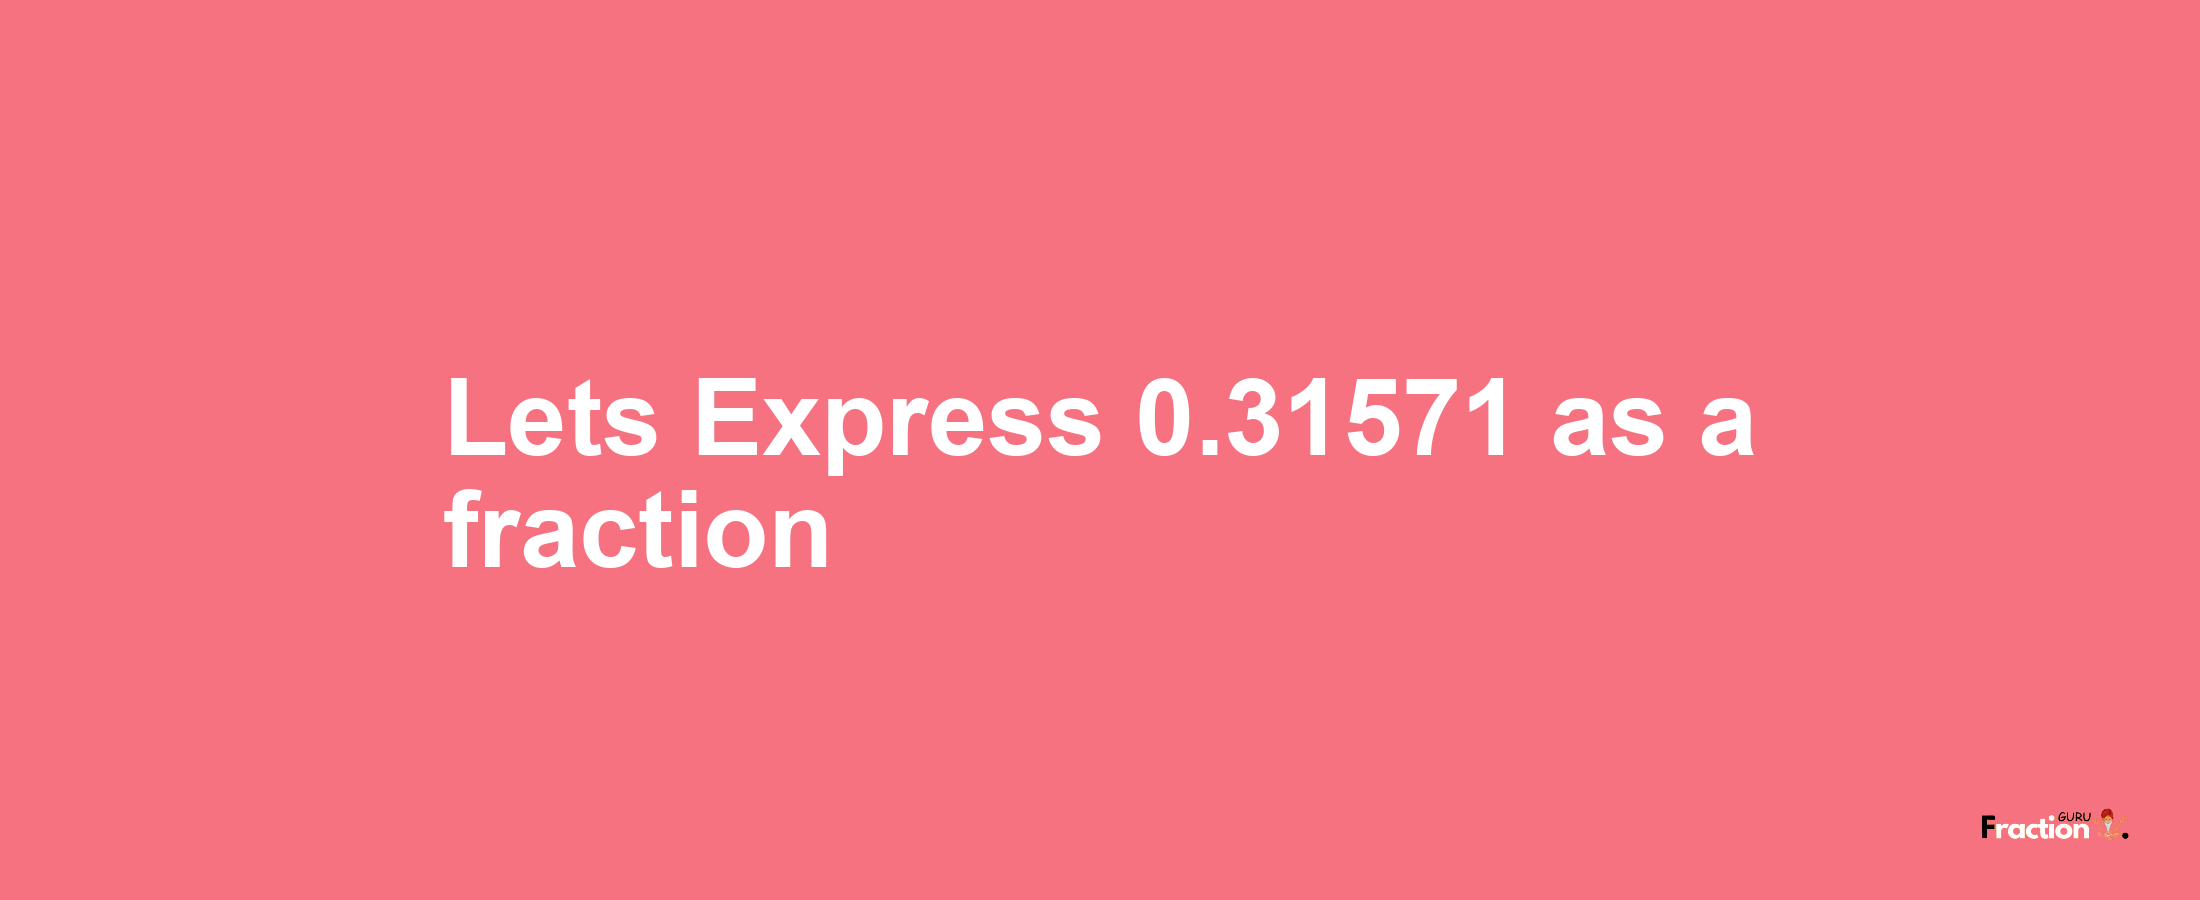 Lets Express 0.31571 as afraction